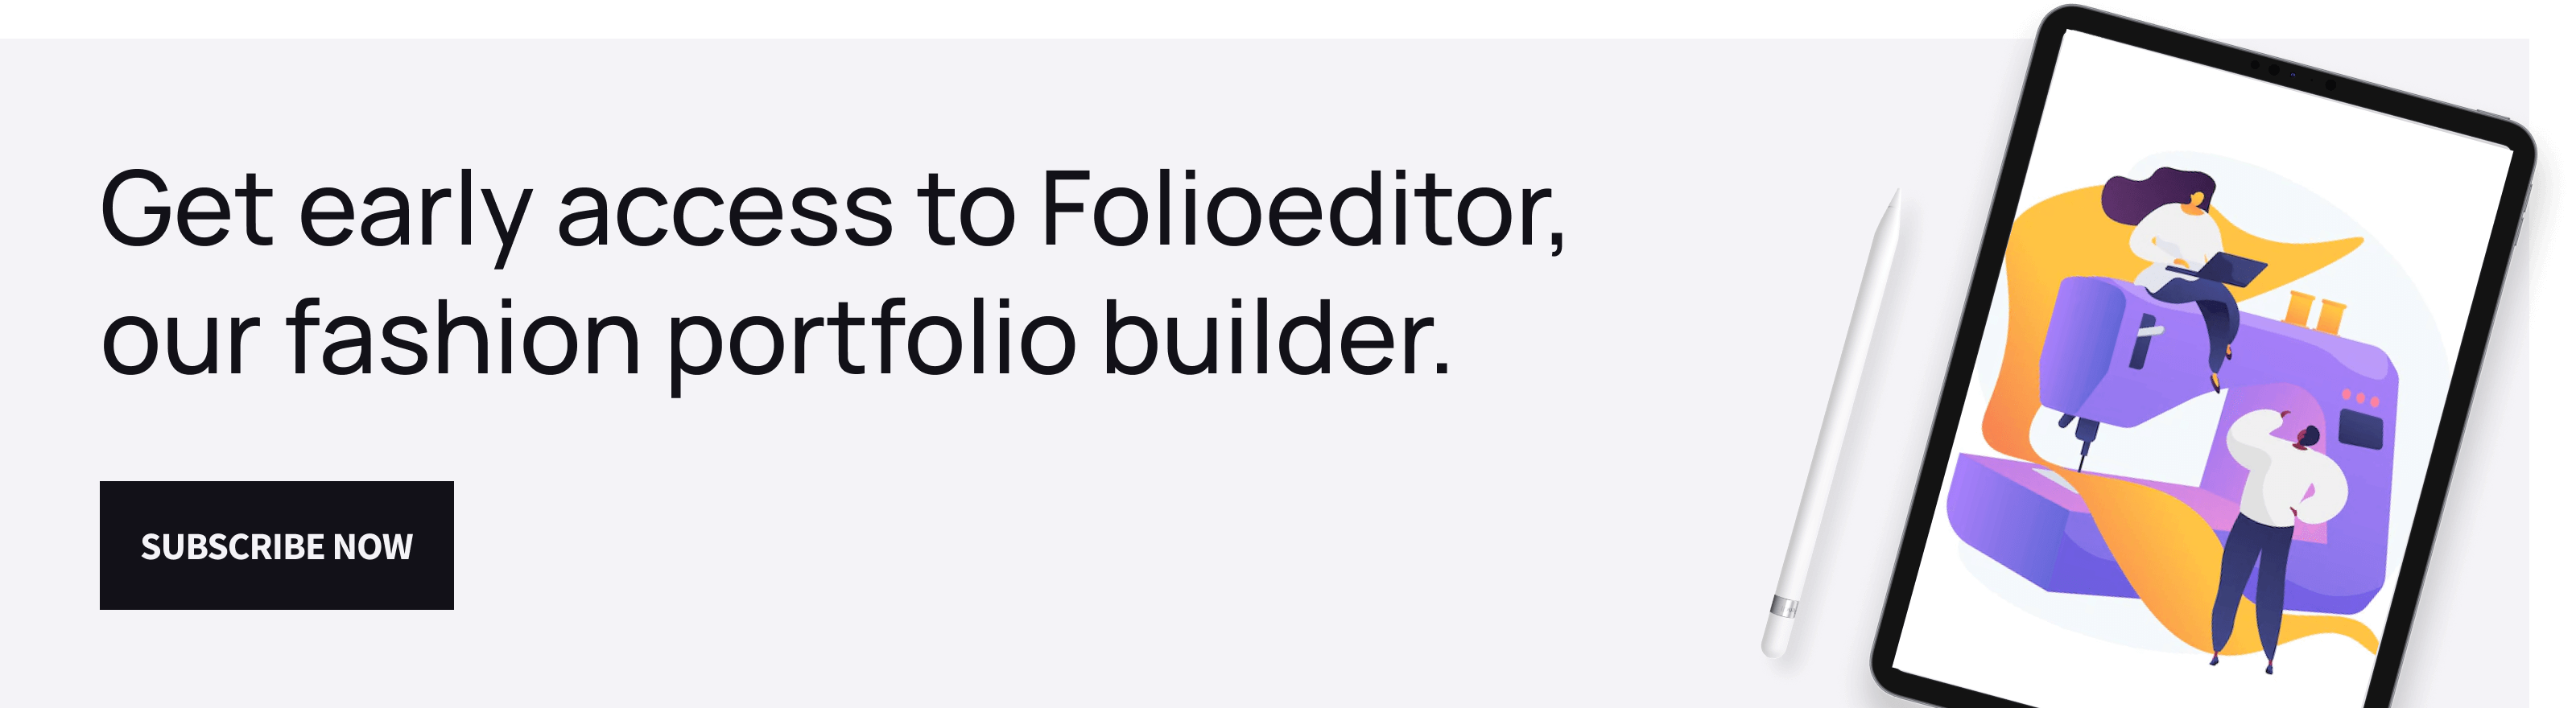 Get early access to Folioeditor, our fashion portfolio builder.